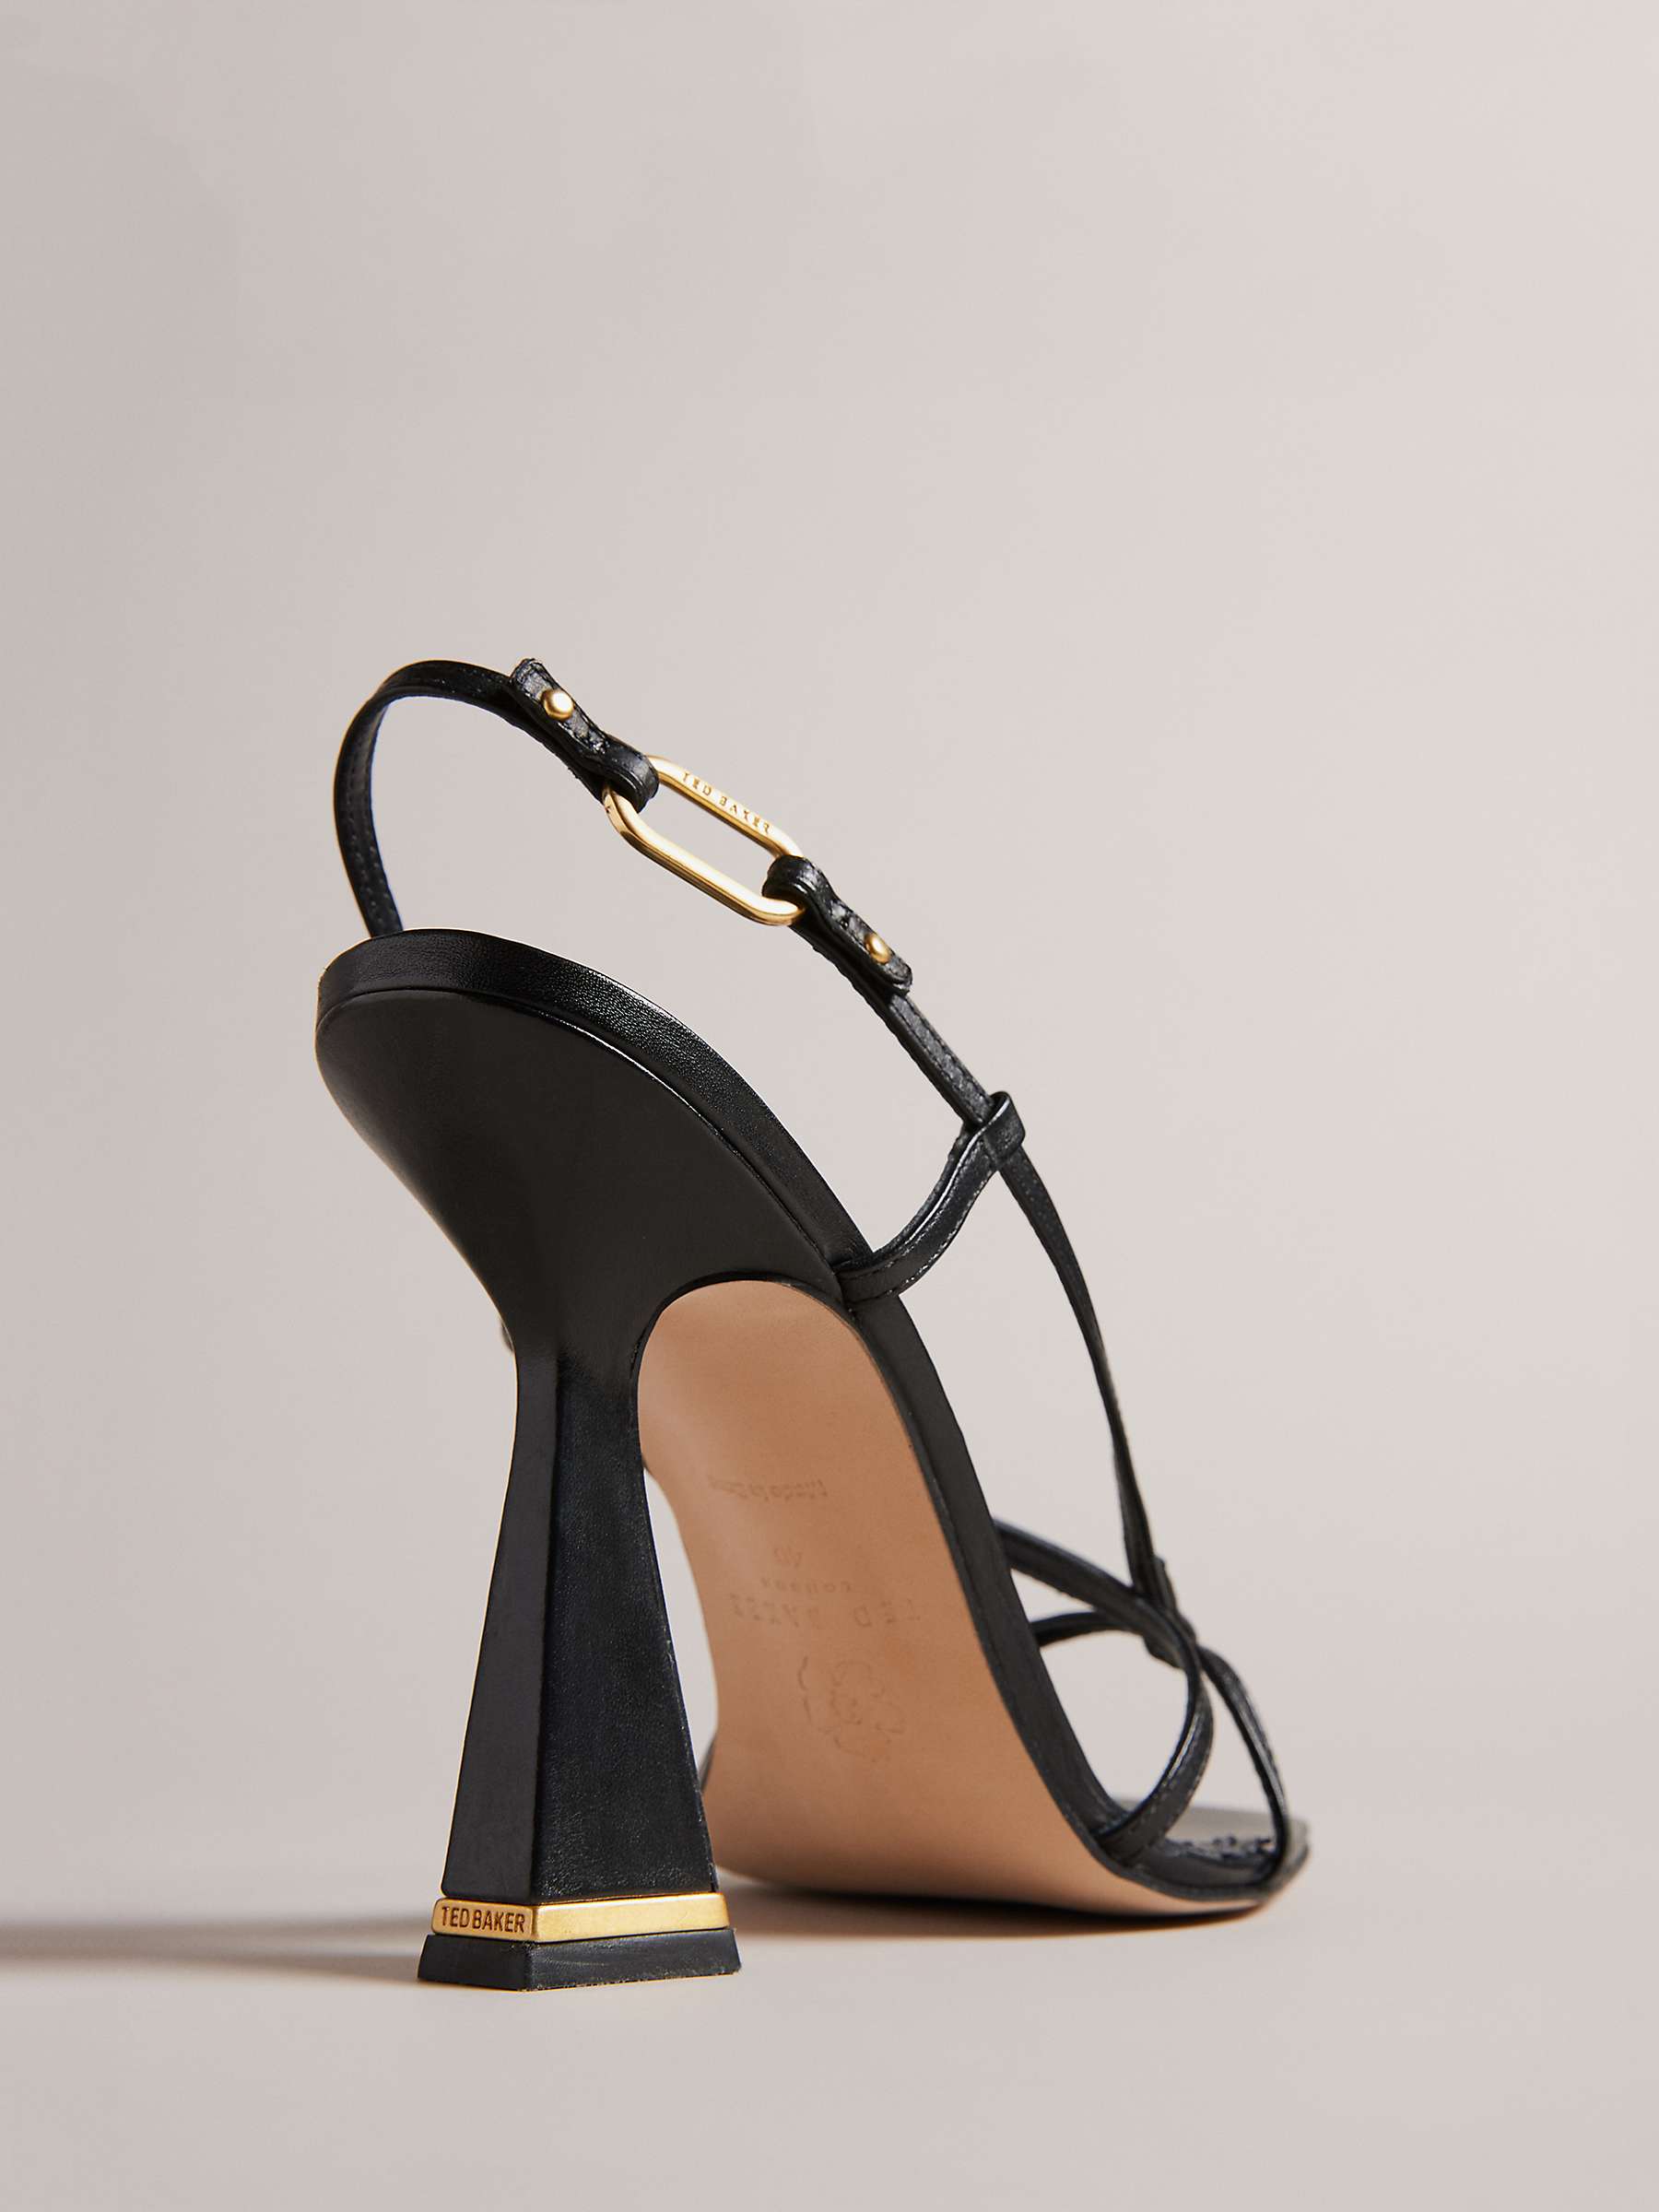 Buy Ted Baker Cayena High Heel Leather Sandals Online at johnlewis.com